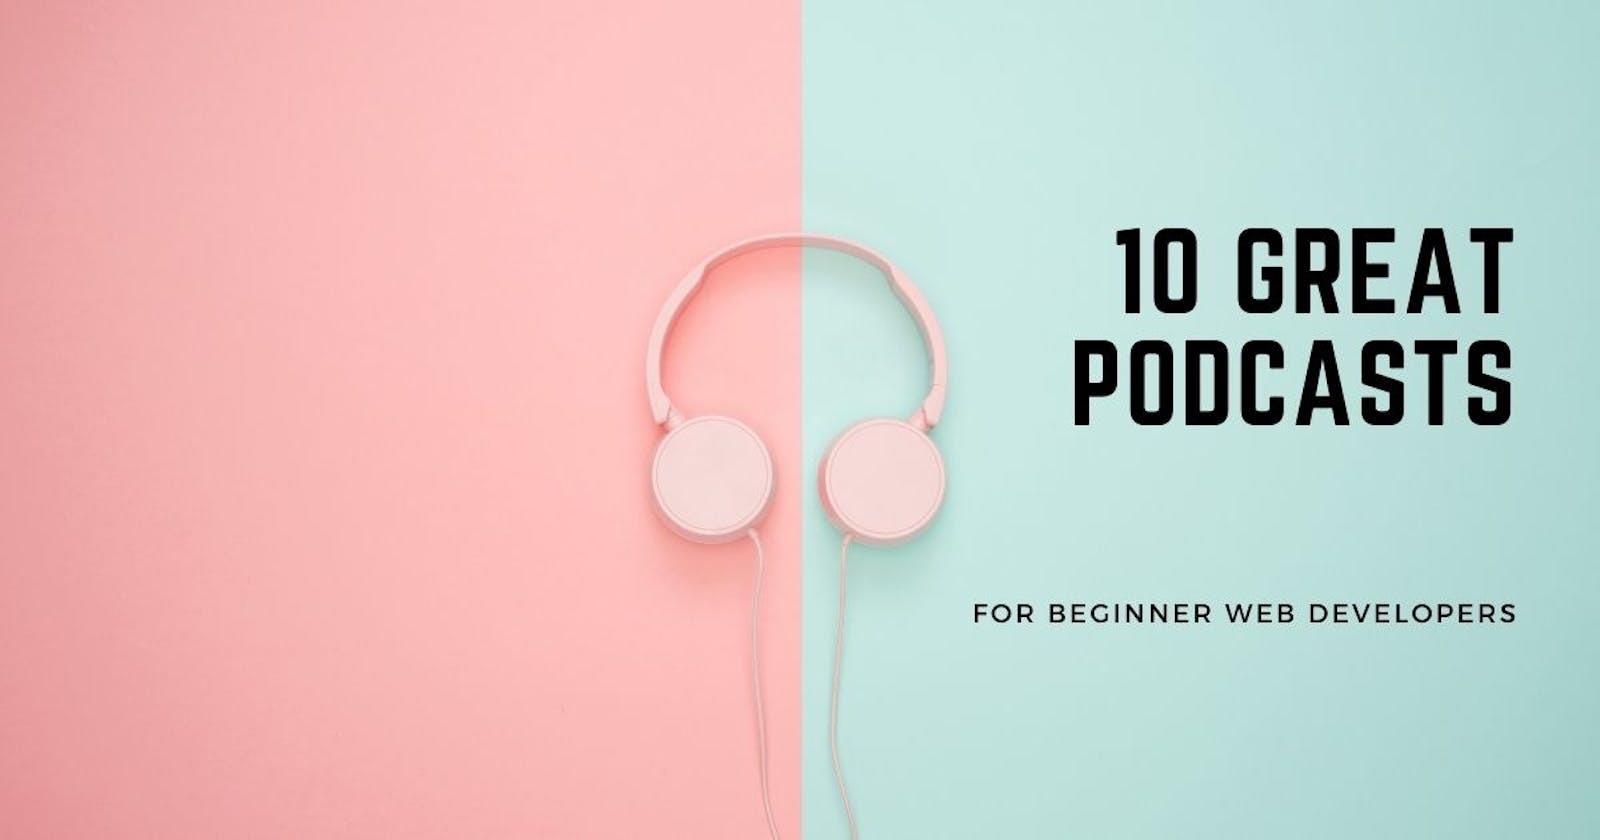 10 great podcasts for beginner web developers